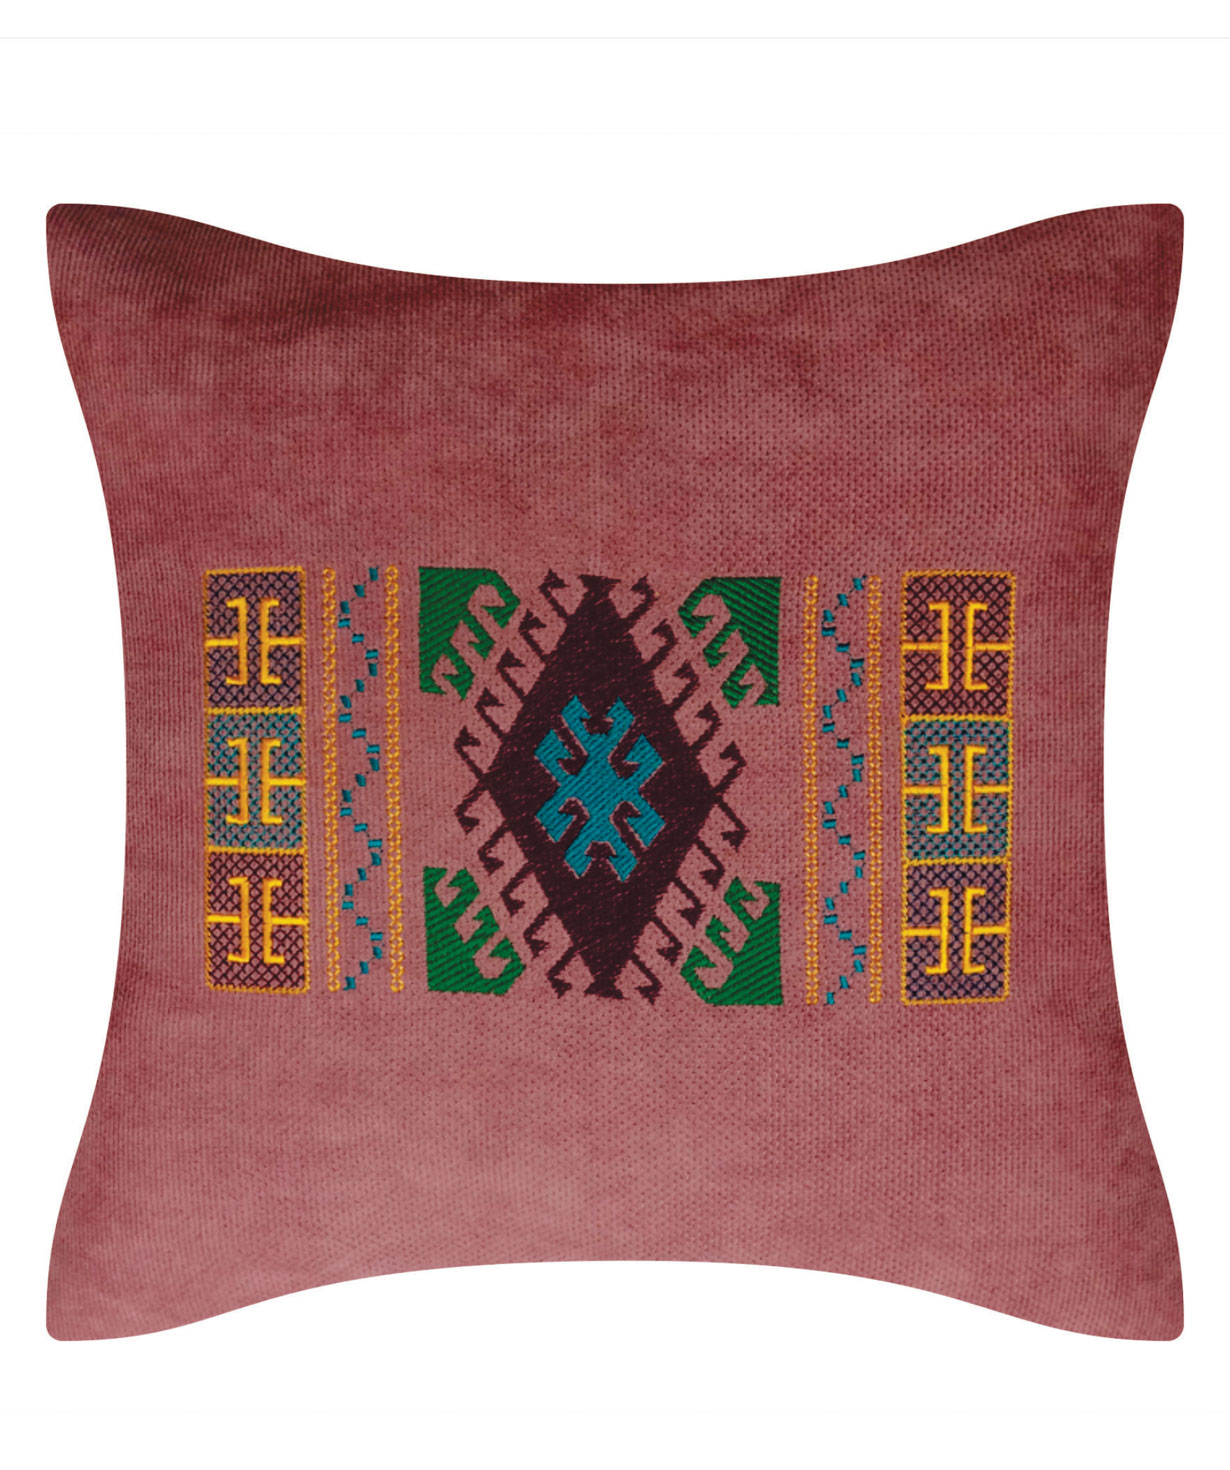 Pillow `Miskaryan heritage` embroidered with Armenian ornament №25